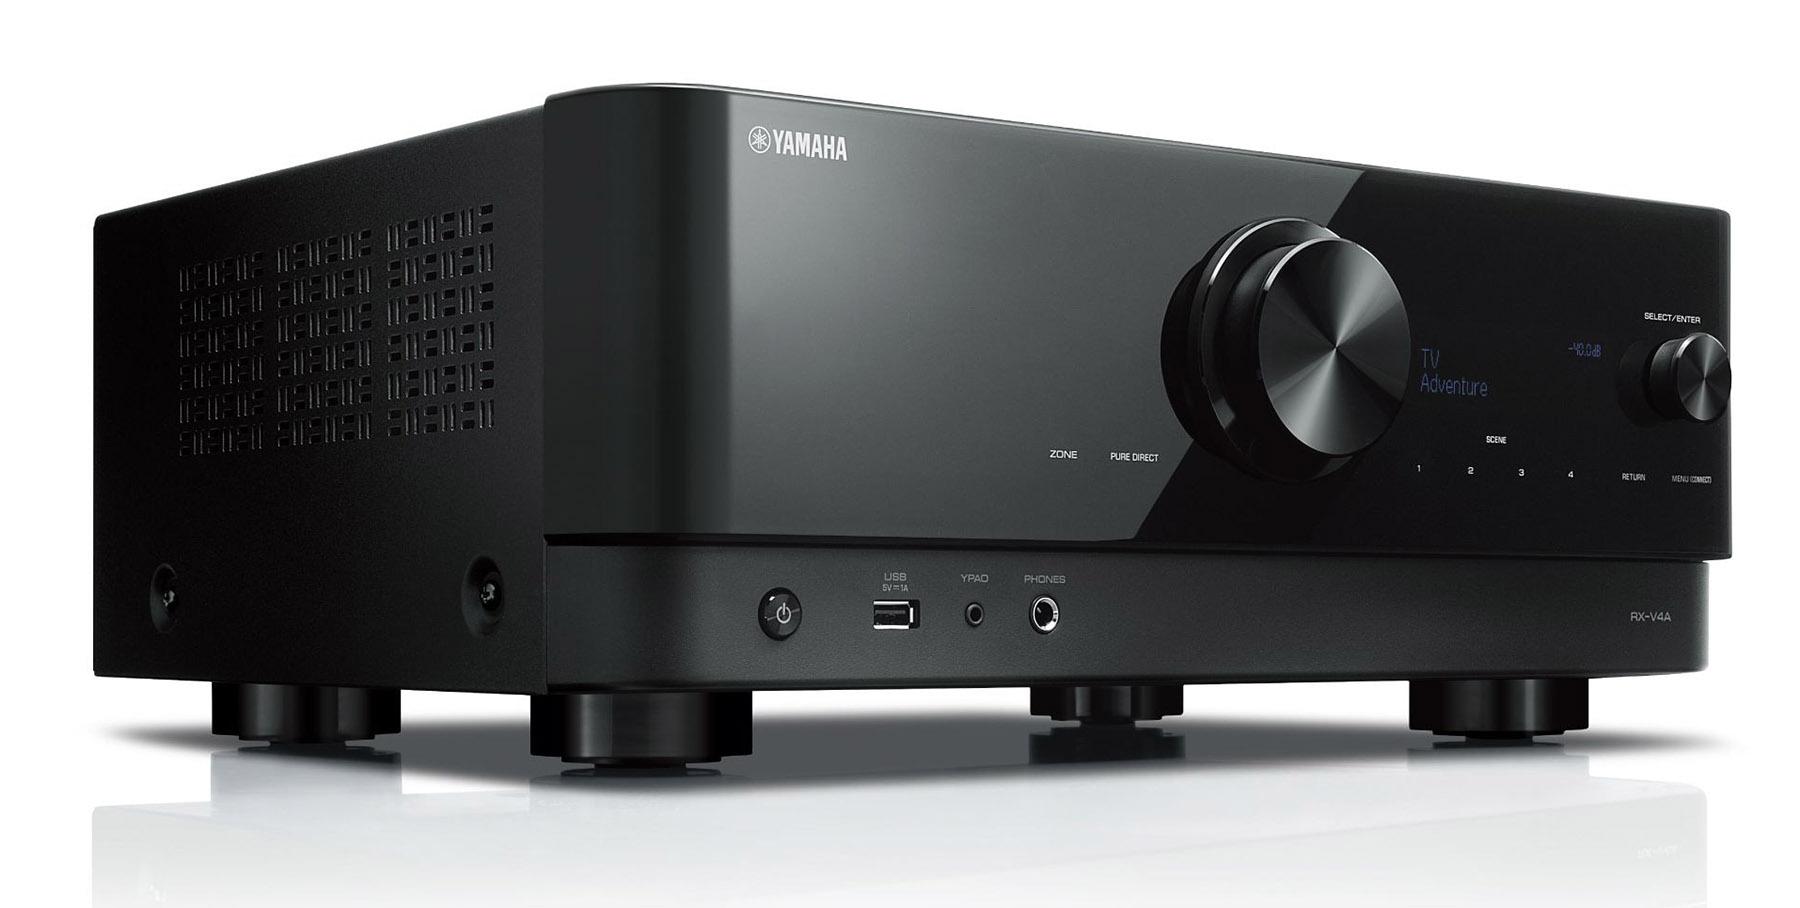 The least expensive of Yamaha’s new generation of AV receivers has features and performance that once cost thousands, and some that will keep it current for years. SVS Prime 3133f26b yahamarx v4afront